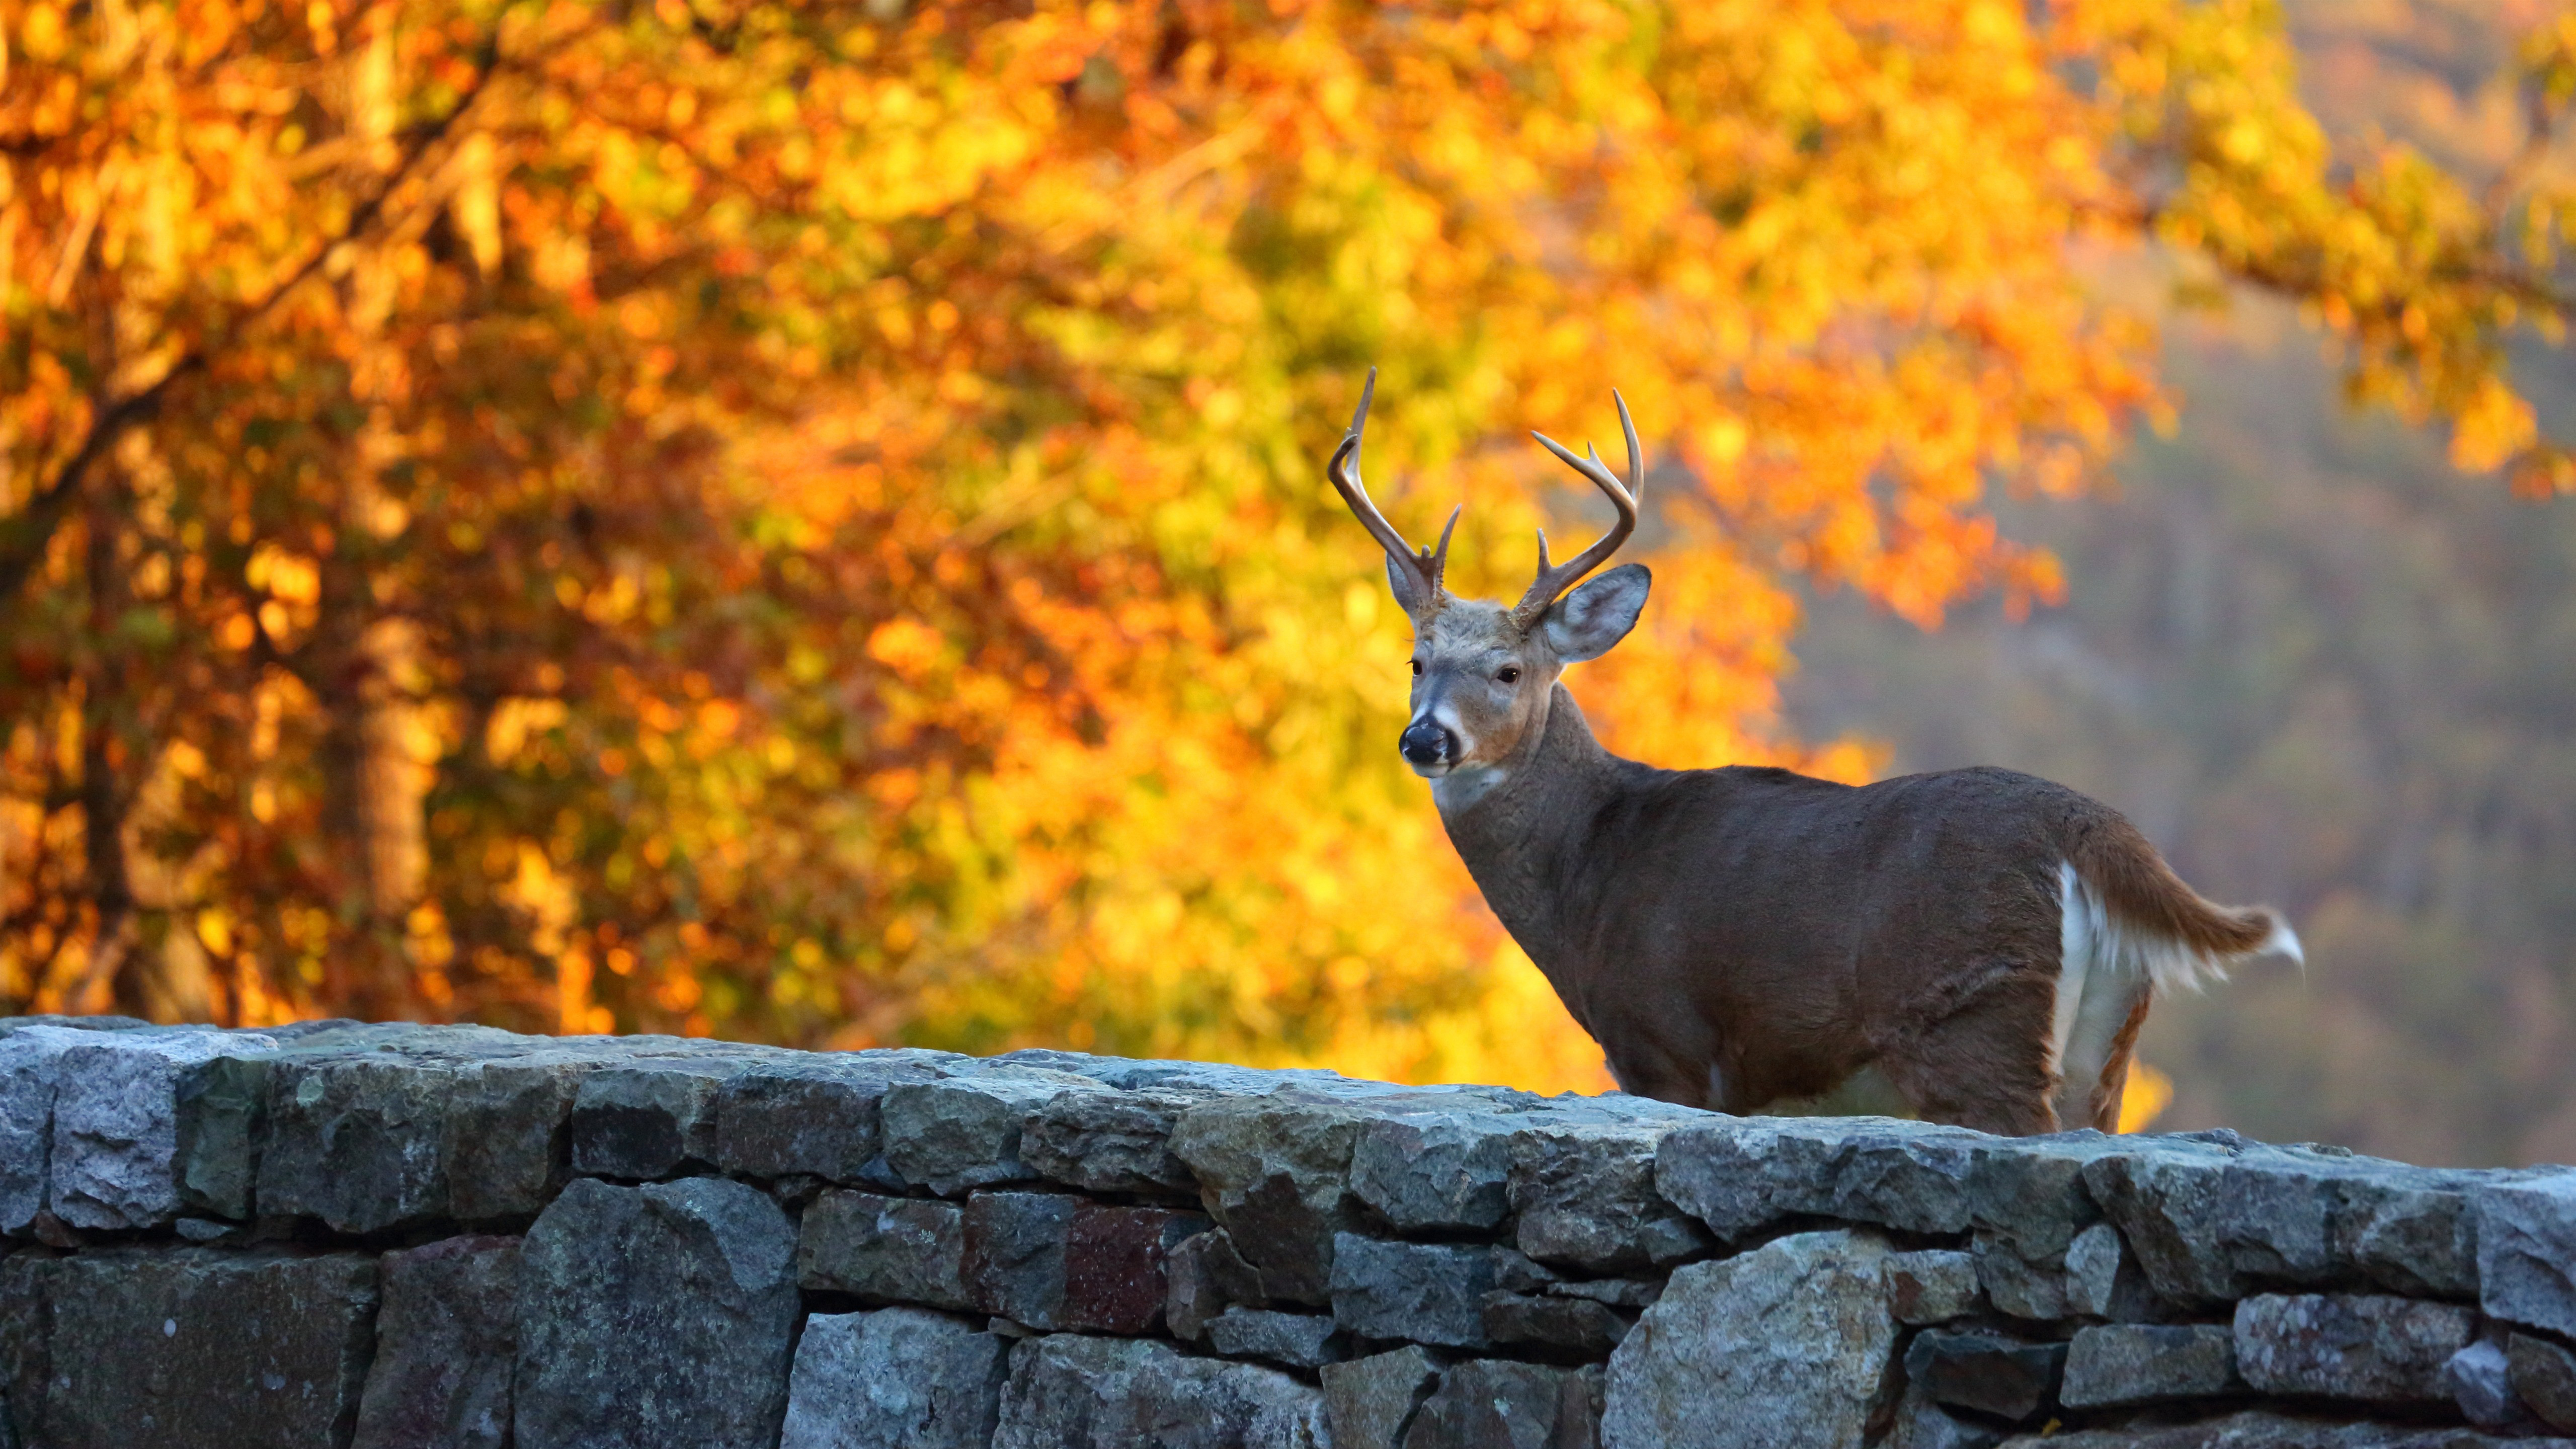 Whitetail Deer With Wallpaper Of Tree With Yellow Leaves K K HD Deer